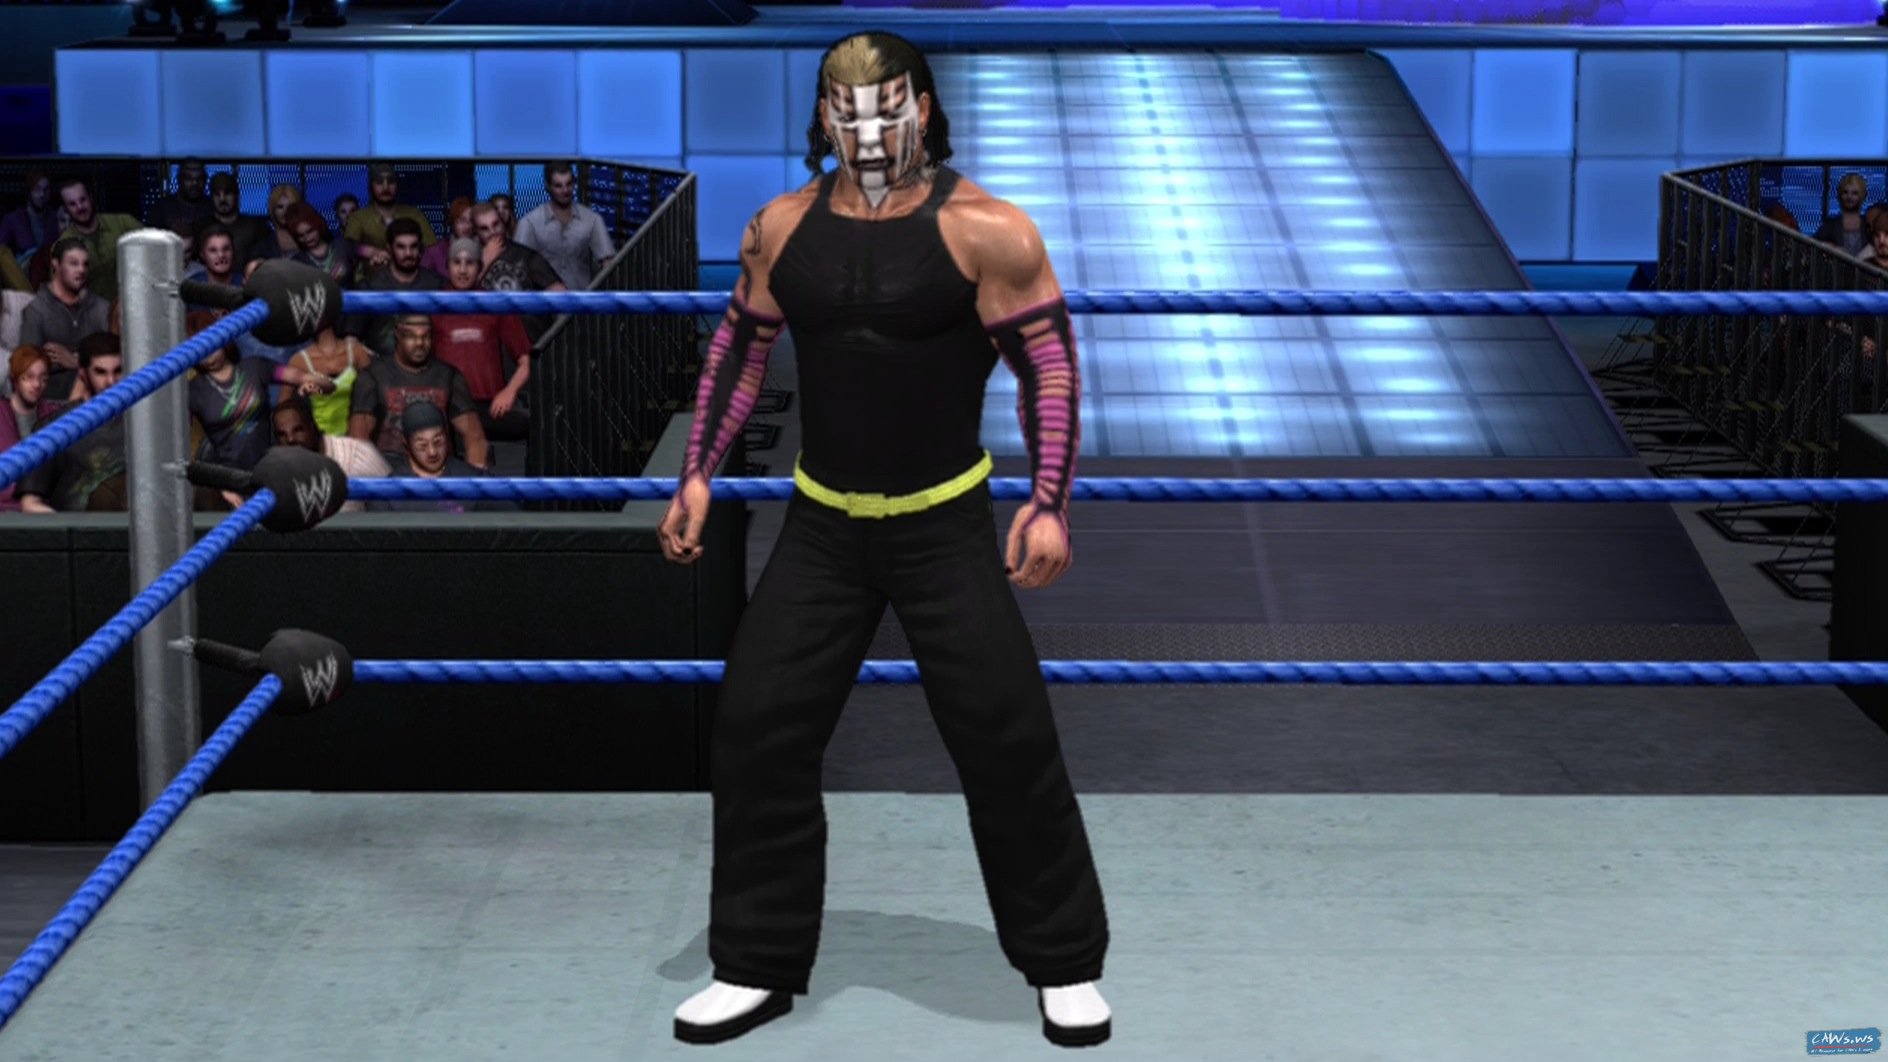 jeff4 - WWE 2k23 PPSSPP ISO file and data (Highly compressed) Download